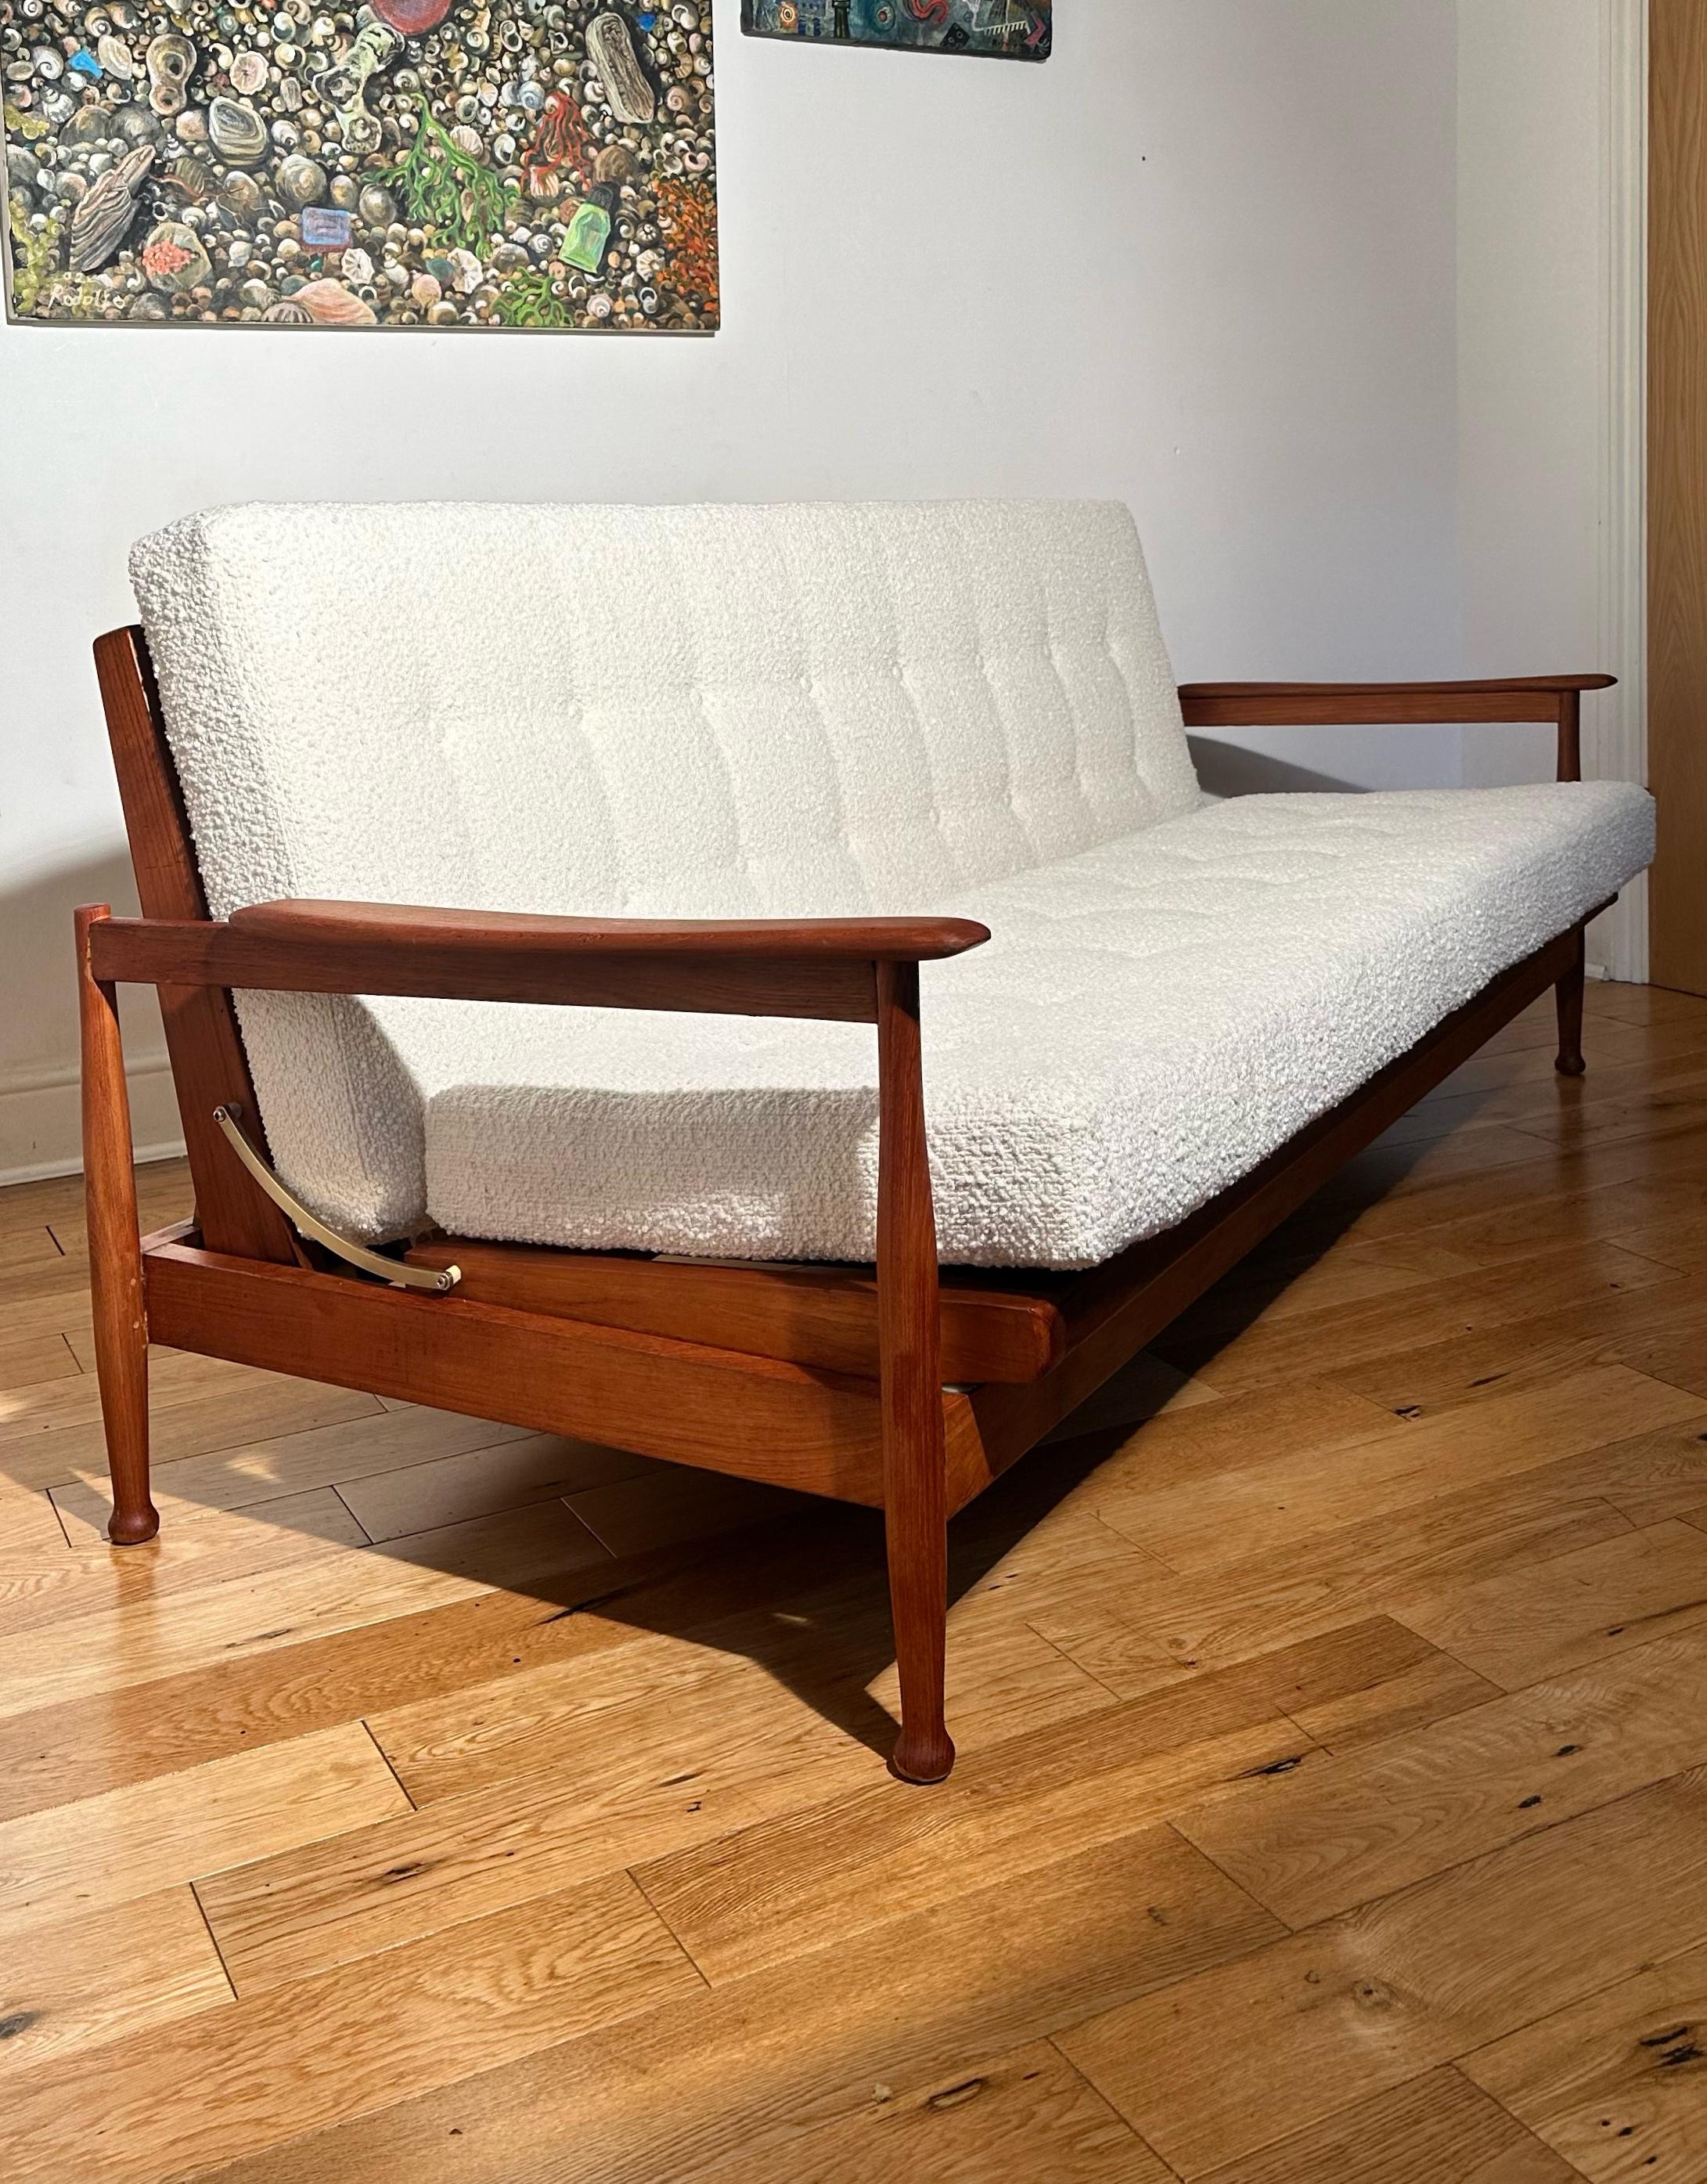 Stunning mid-century Guy Rogers ‘Manhattan’ sofa bed manufactured in the 1960s 
Beautifully made from top quality solid teak with beautifully crafted edged armrests.
It has been fully restored and reupholstered at great cost with quality